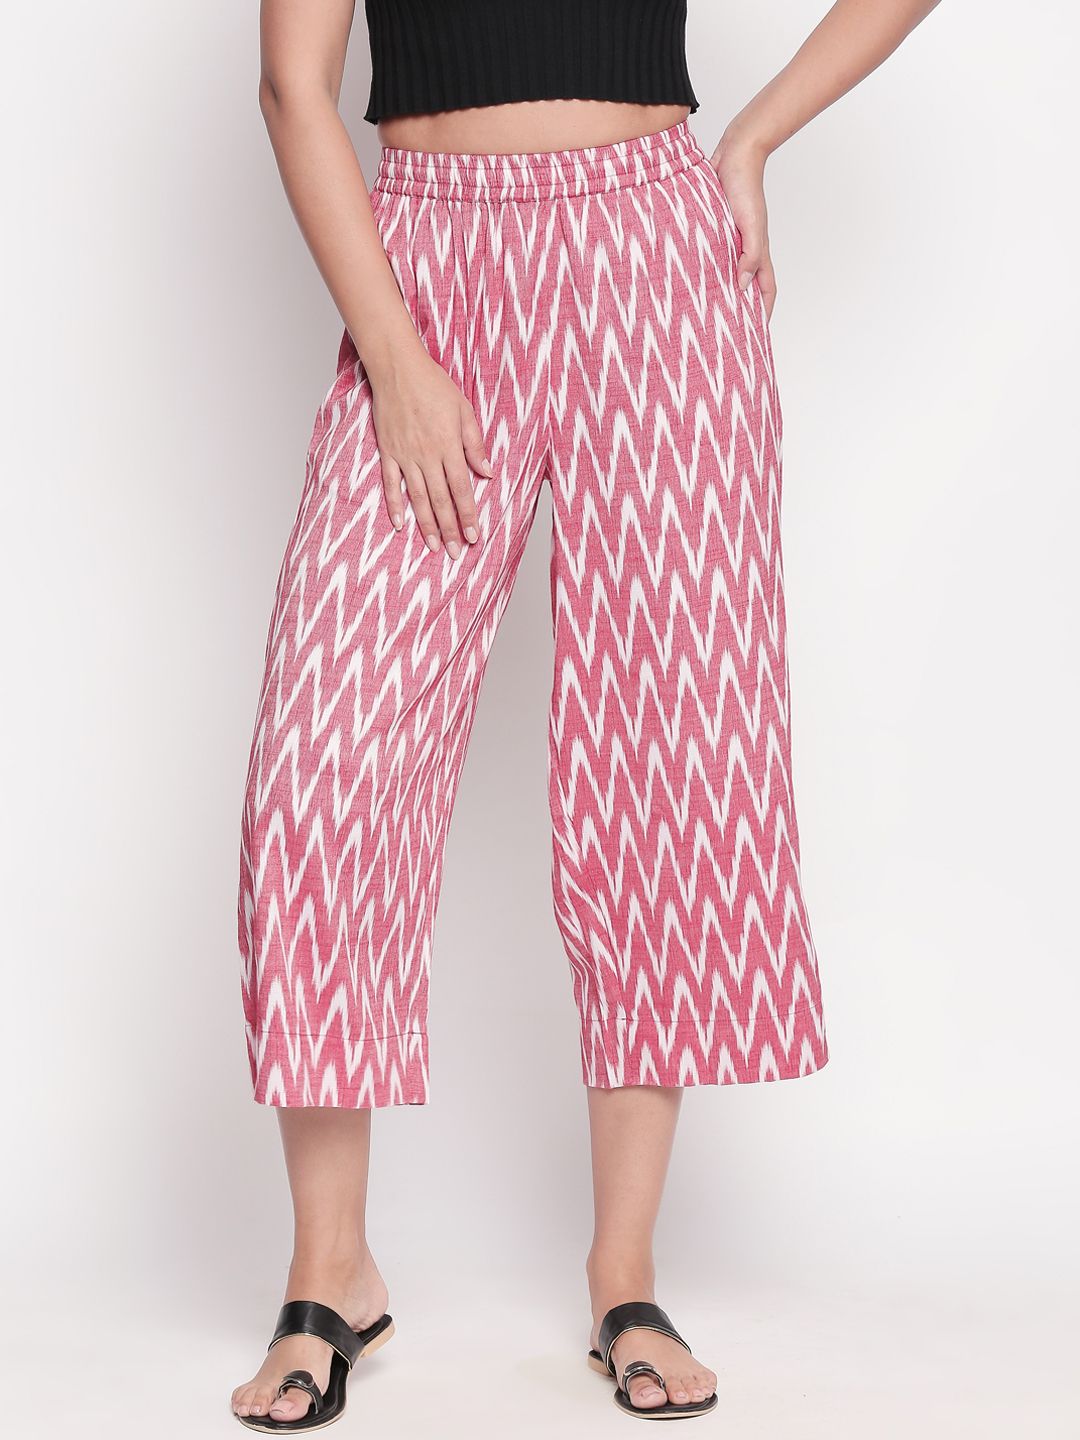 RANGMANCH BY PANTALOONS Women Red & White Regular Fit Printed Culottes Price in India